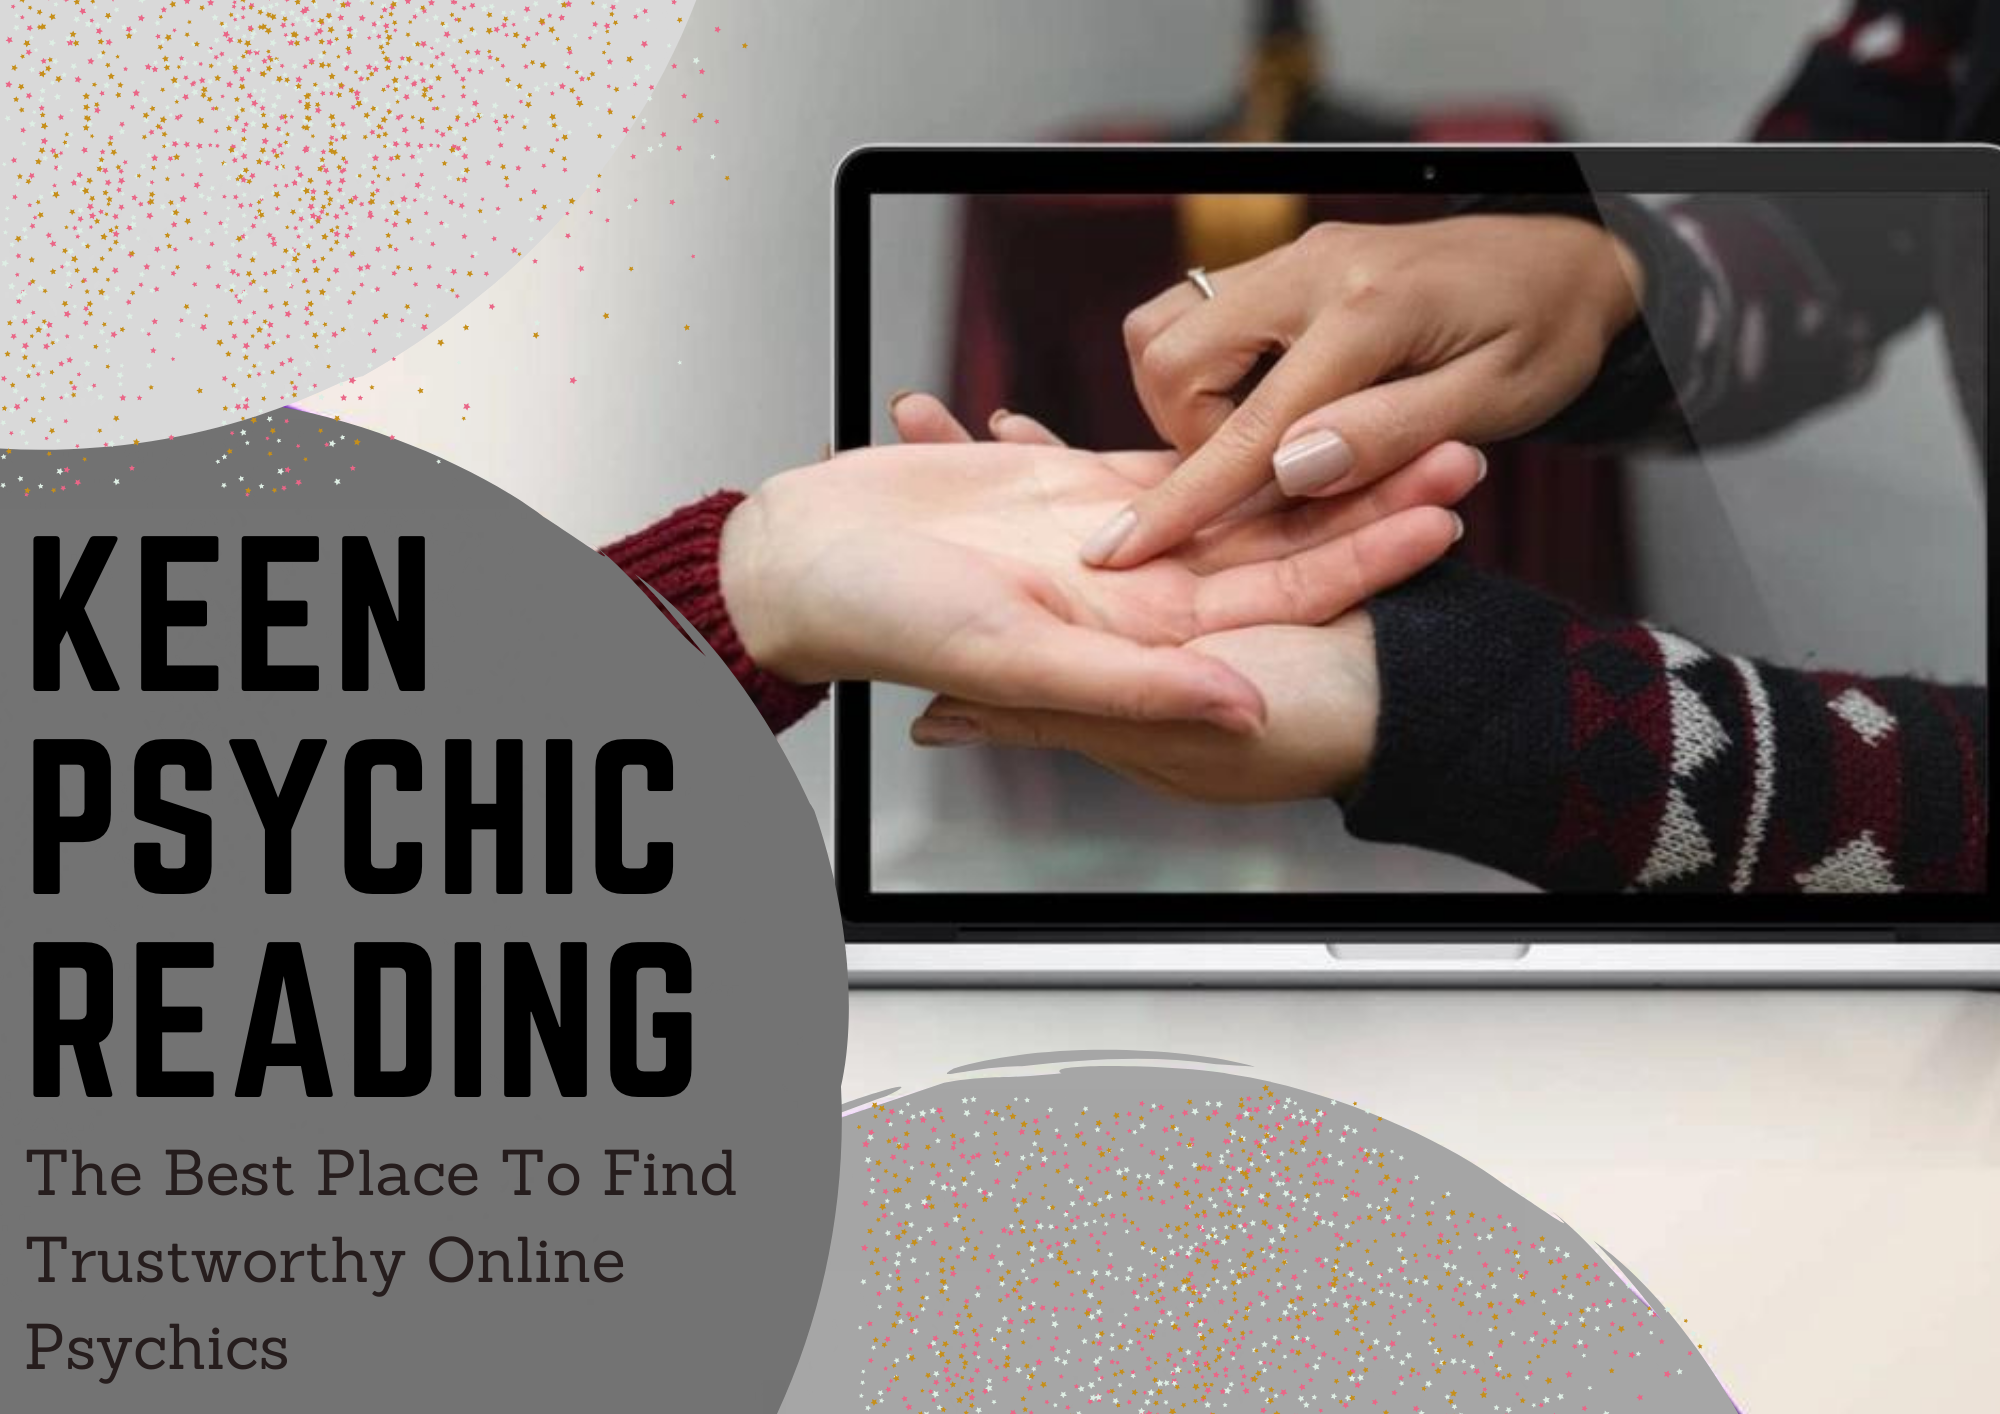 Keen Psychic Reading - The Best Place To Find Trustworthy Online Psychics